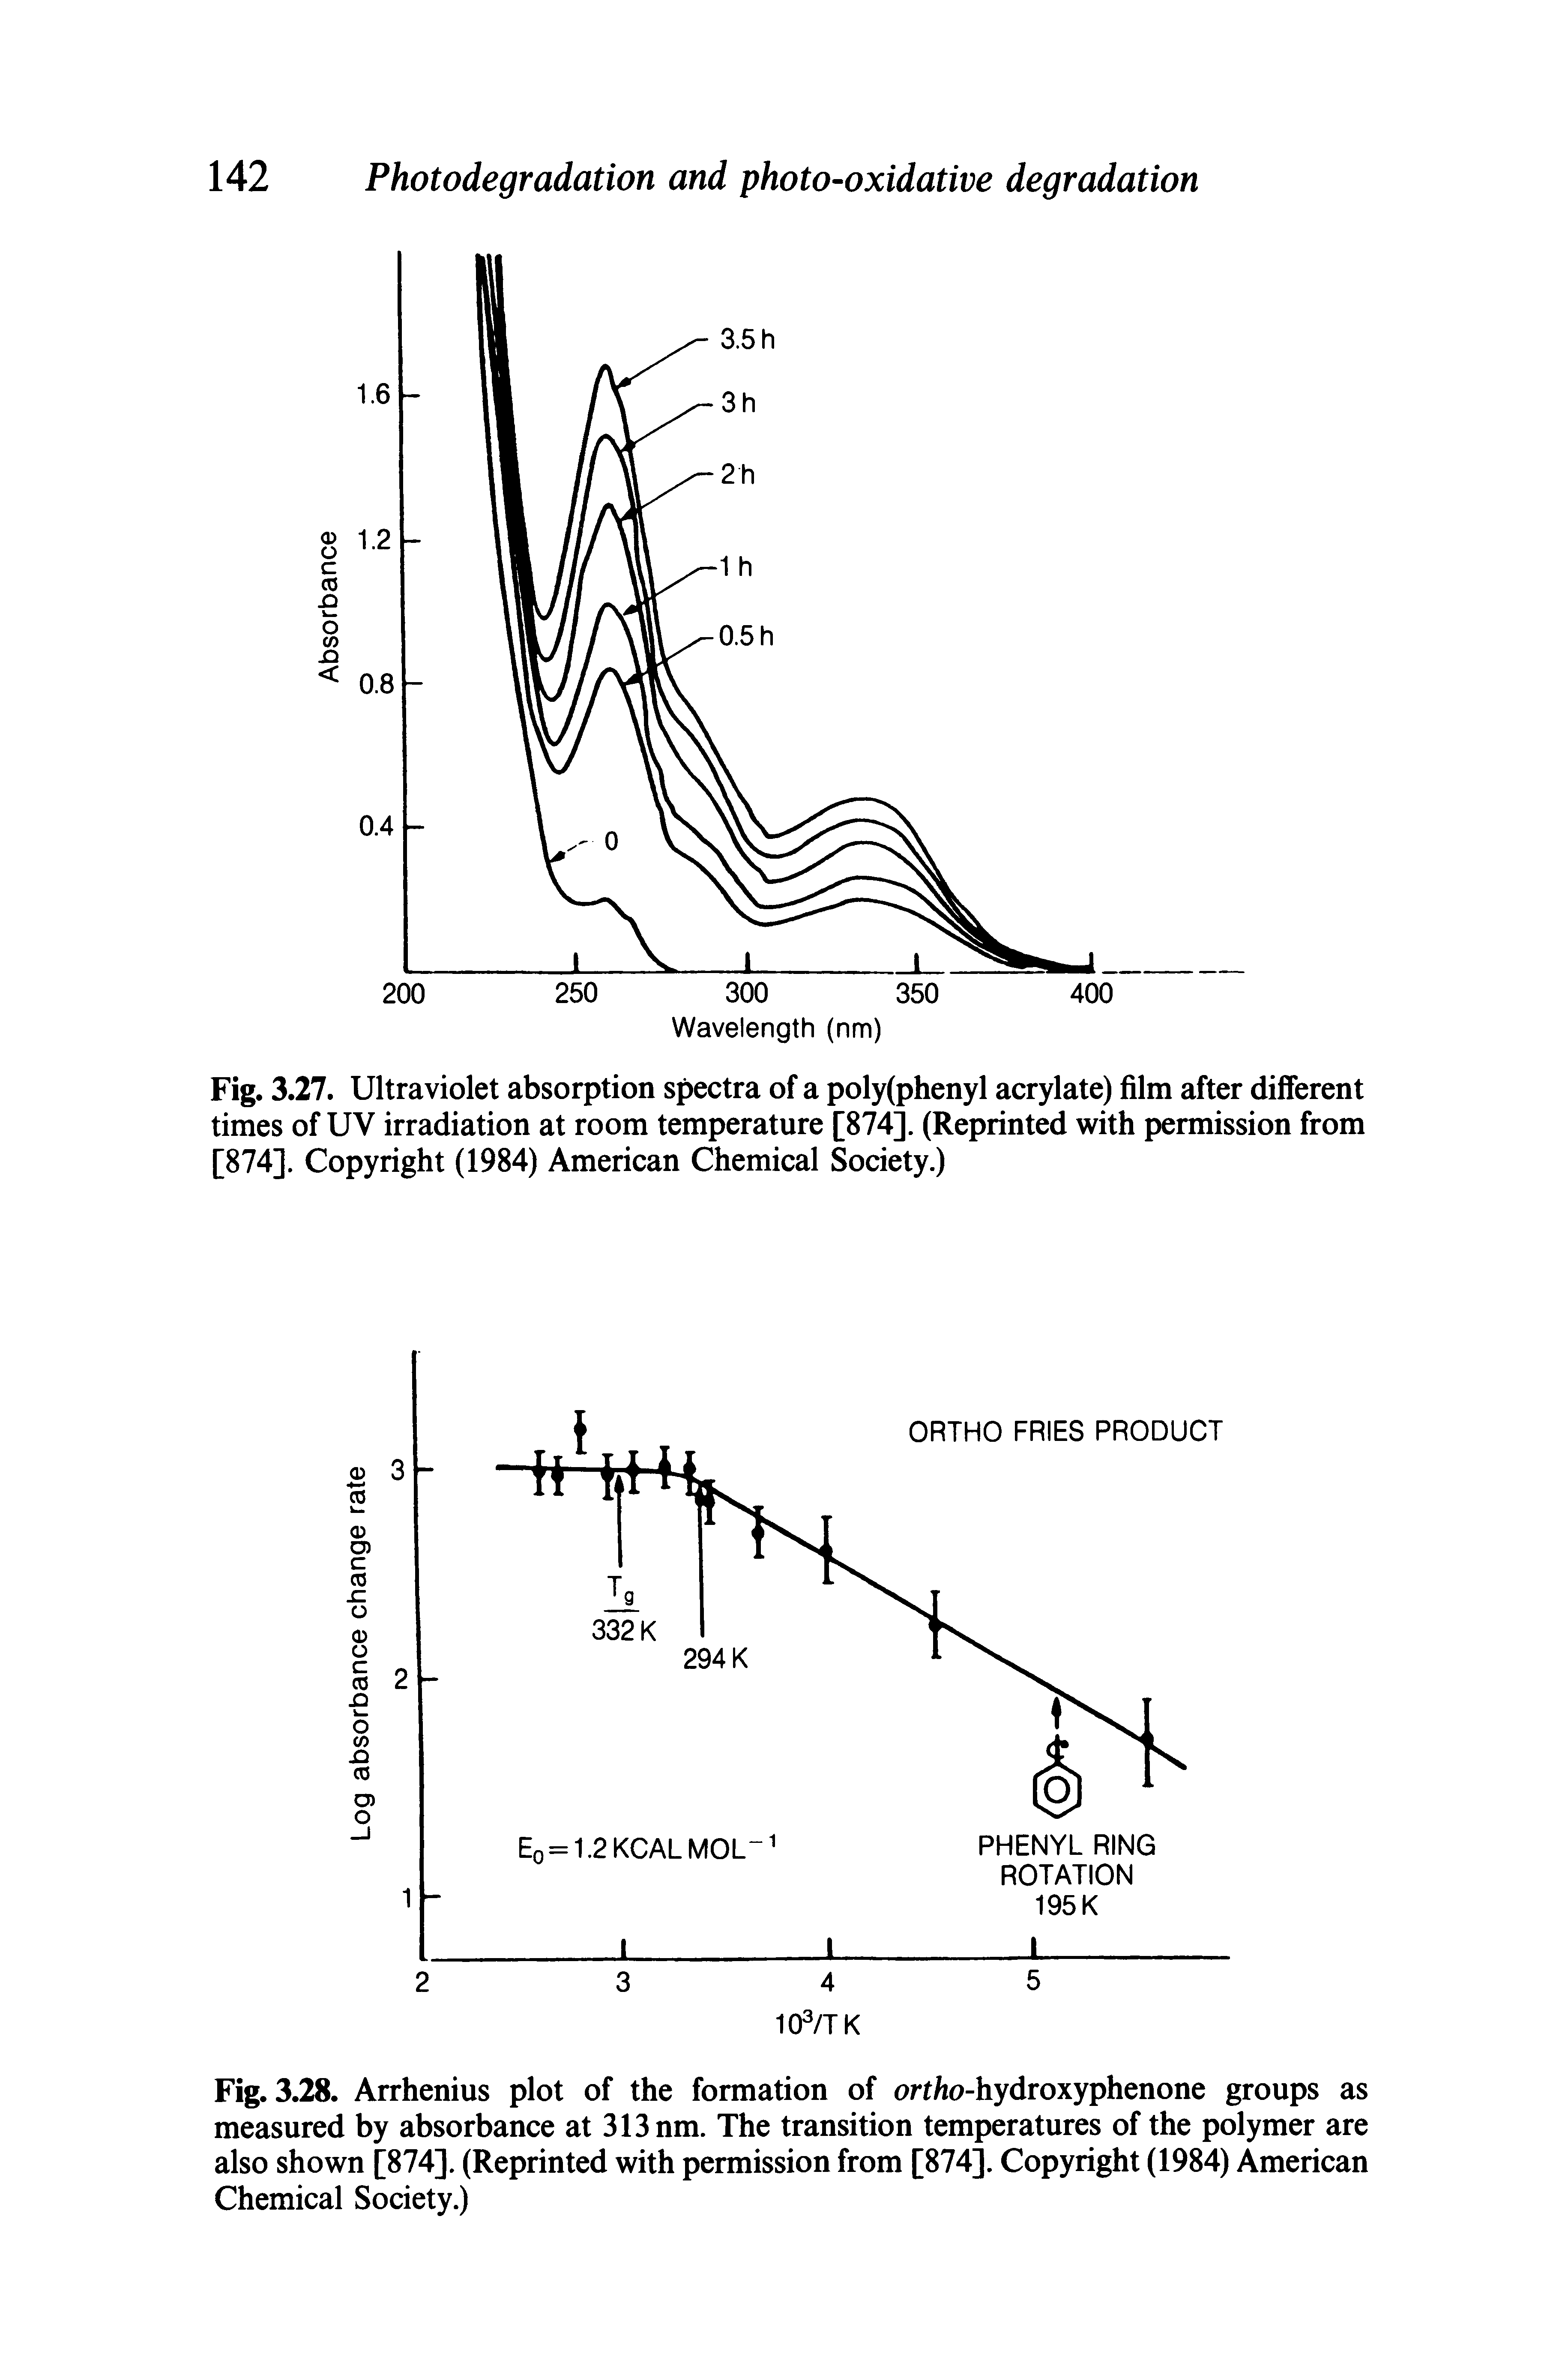 Fig. 3.27. Ultraviolet absorption spectra of a poly(phenyl acrylate) film after different times of UV irradiation at room temperature [874]. (Reprinted with permission from [874]. Copyright (1984) American Chemical Society.)...